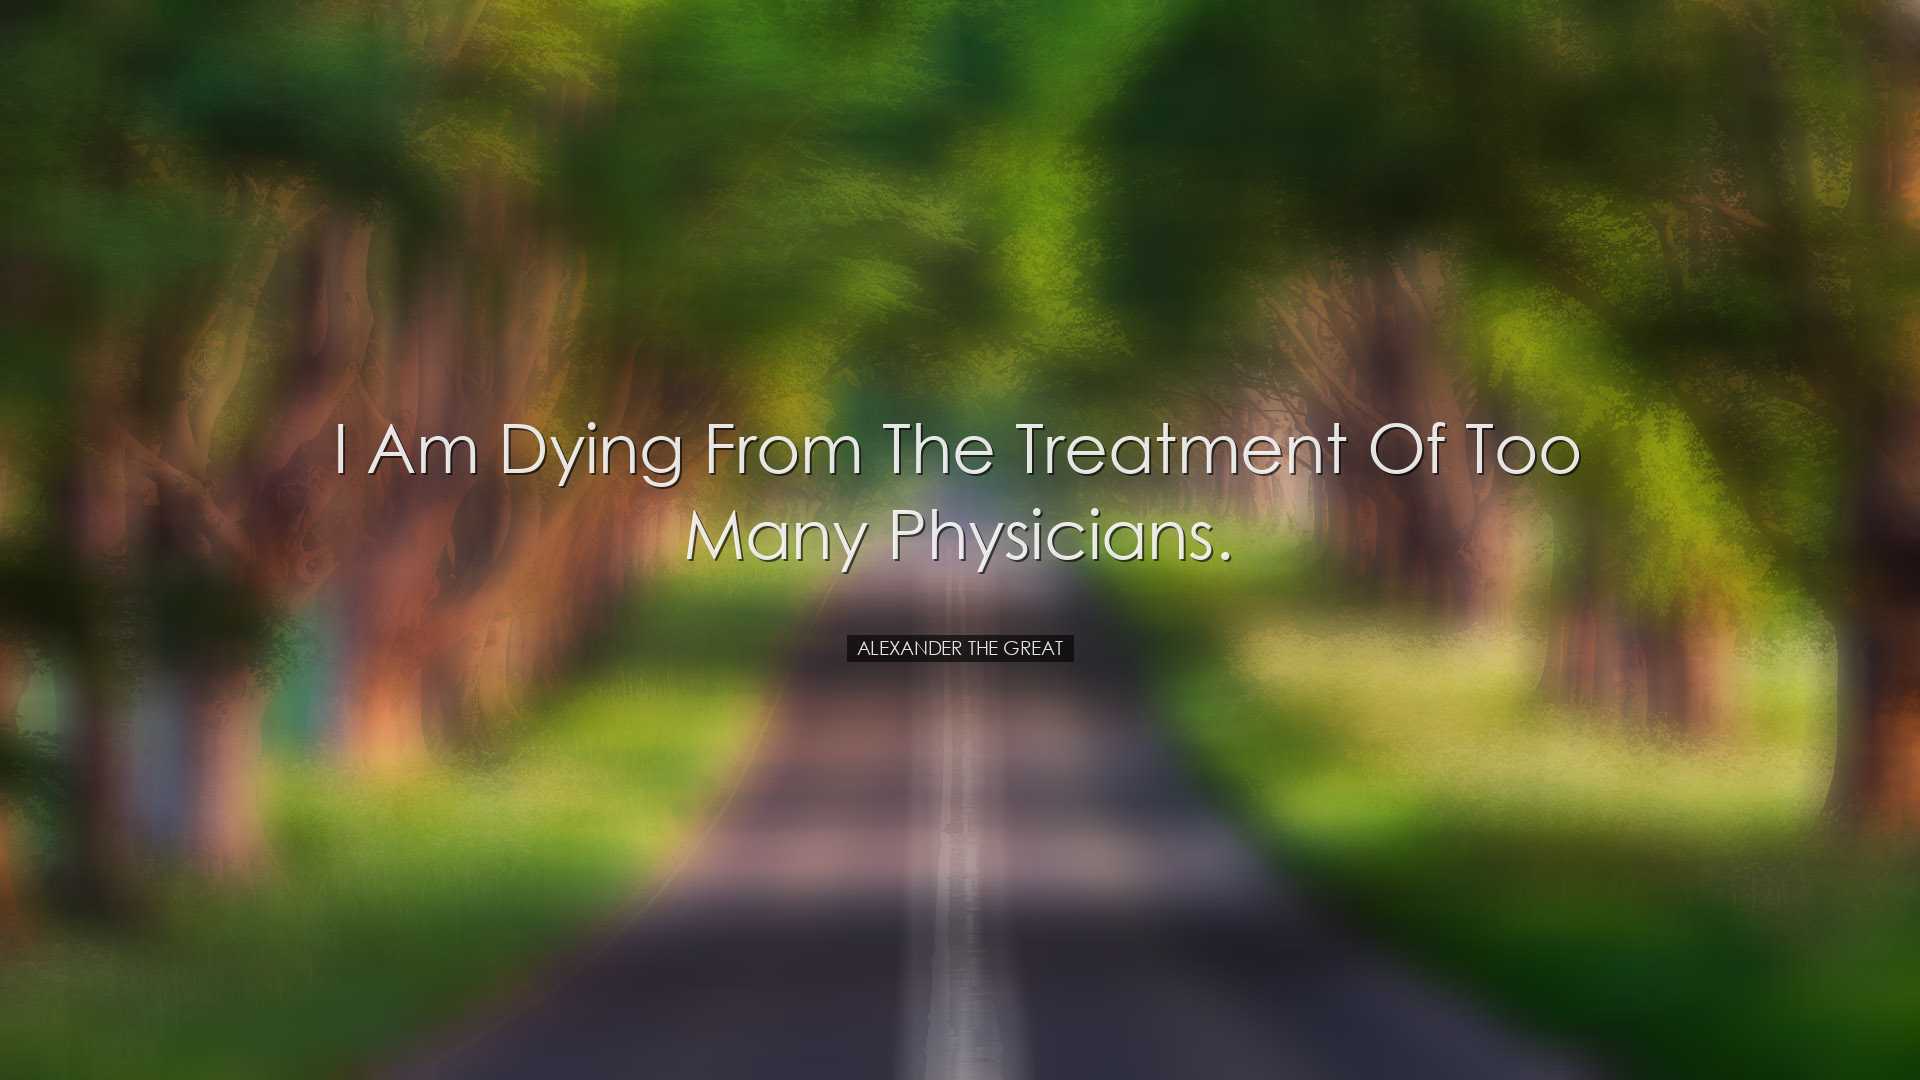 I am dying from the treatment of too many physicians. - Alexander